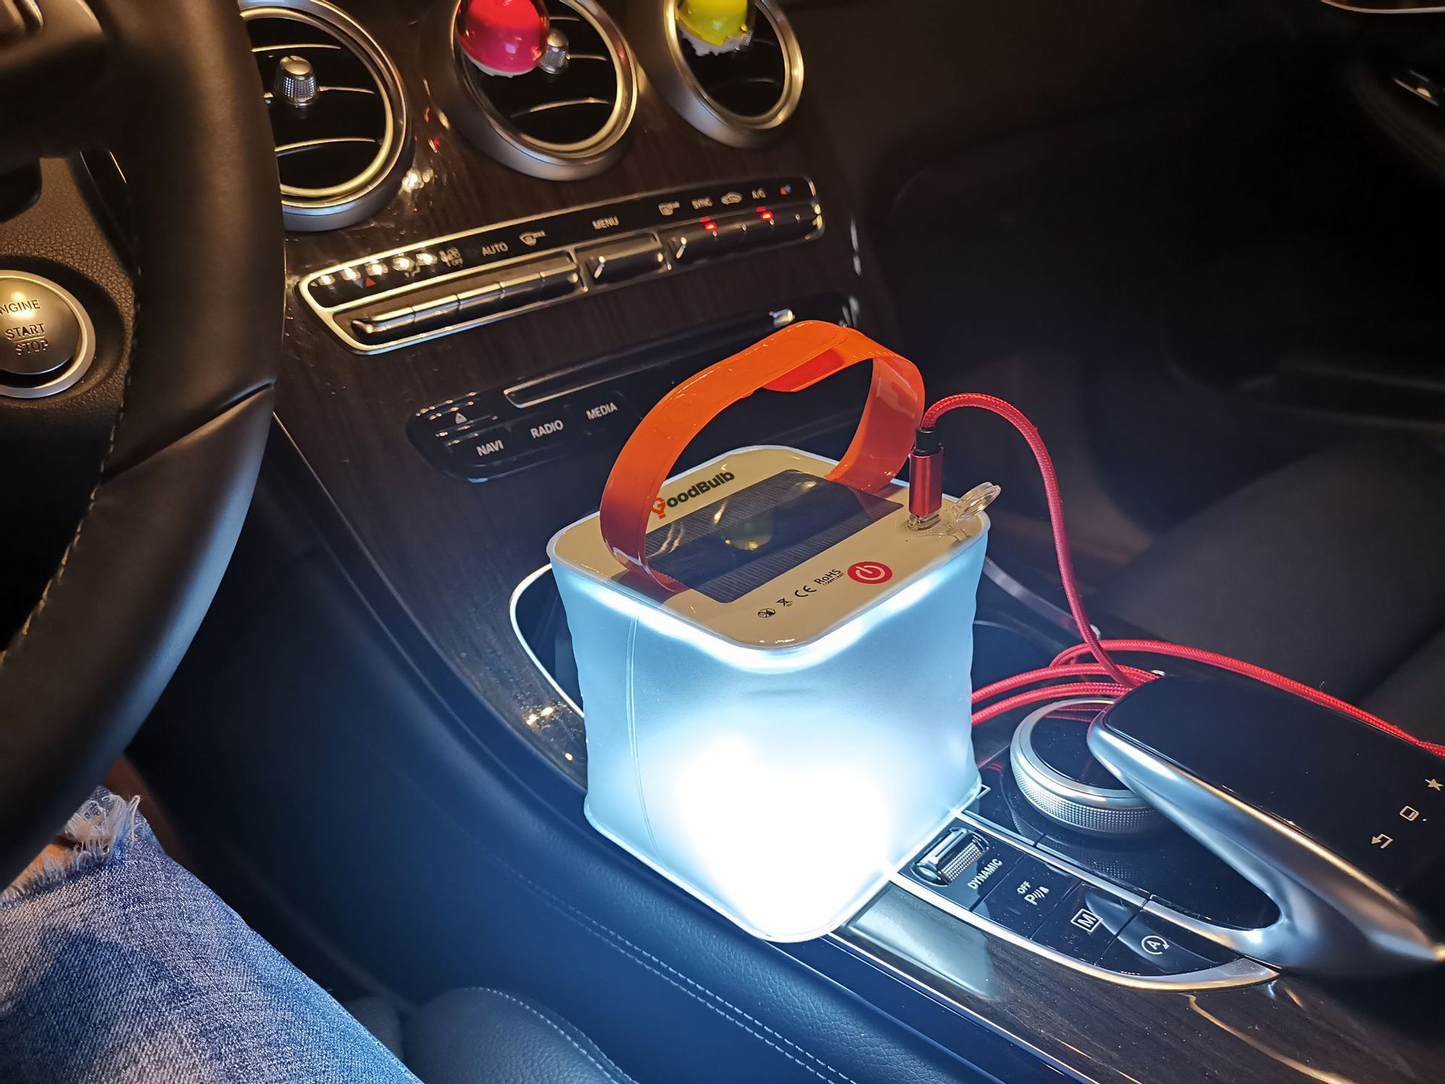 Inflatable Solar portable lantern with cell phone charging kit being used in a car demonstration. 